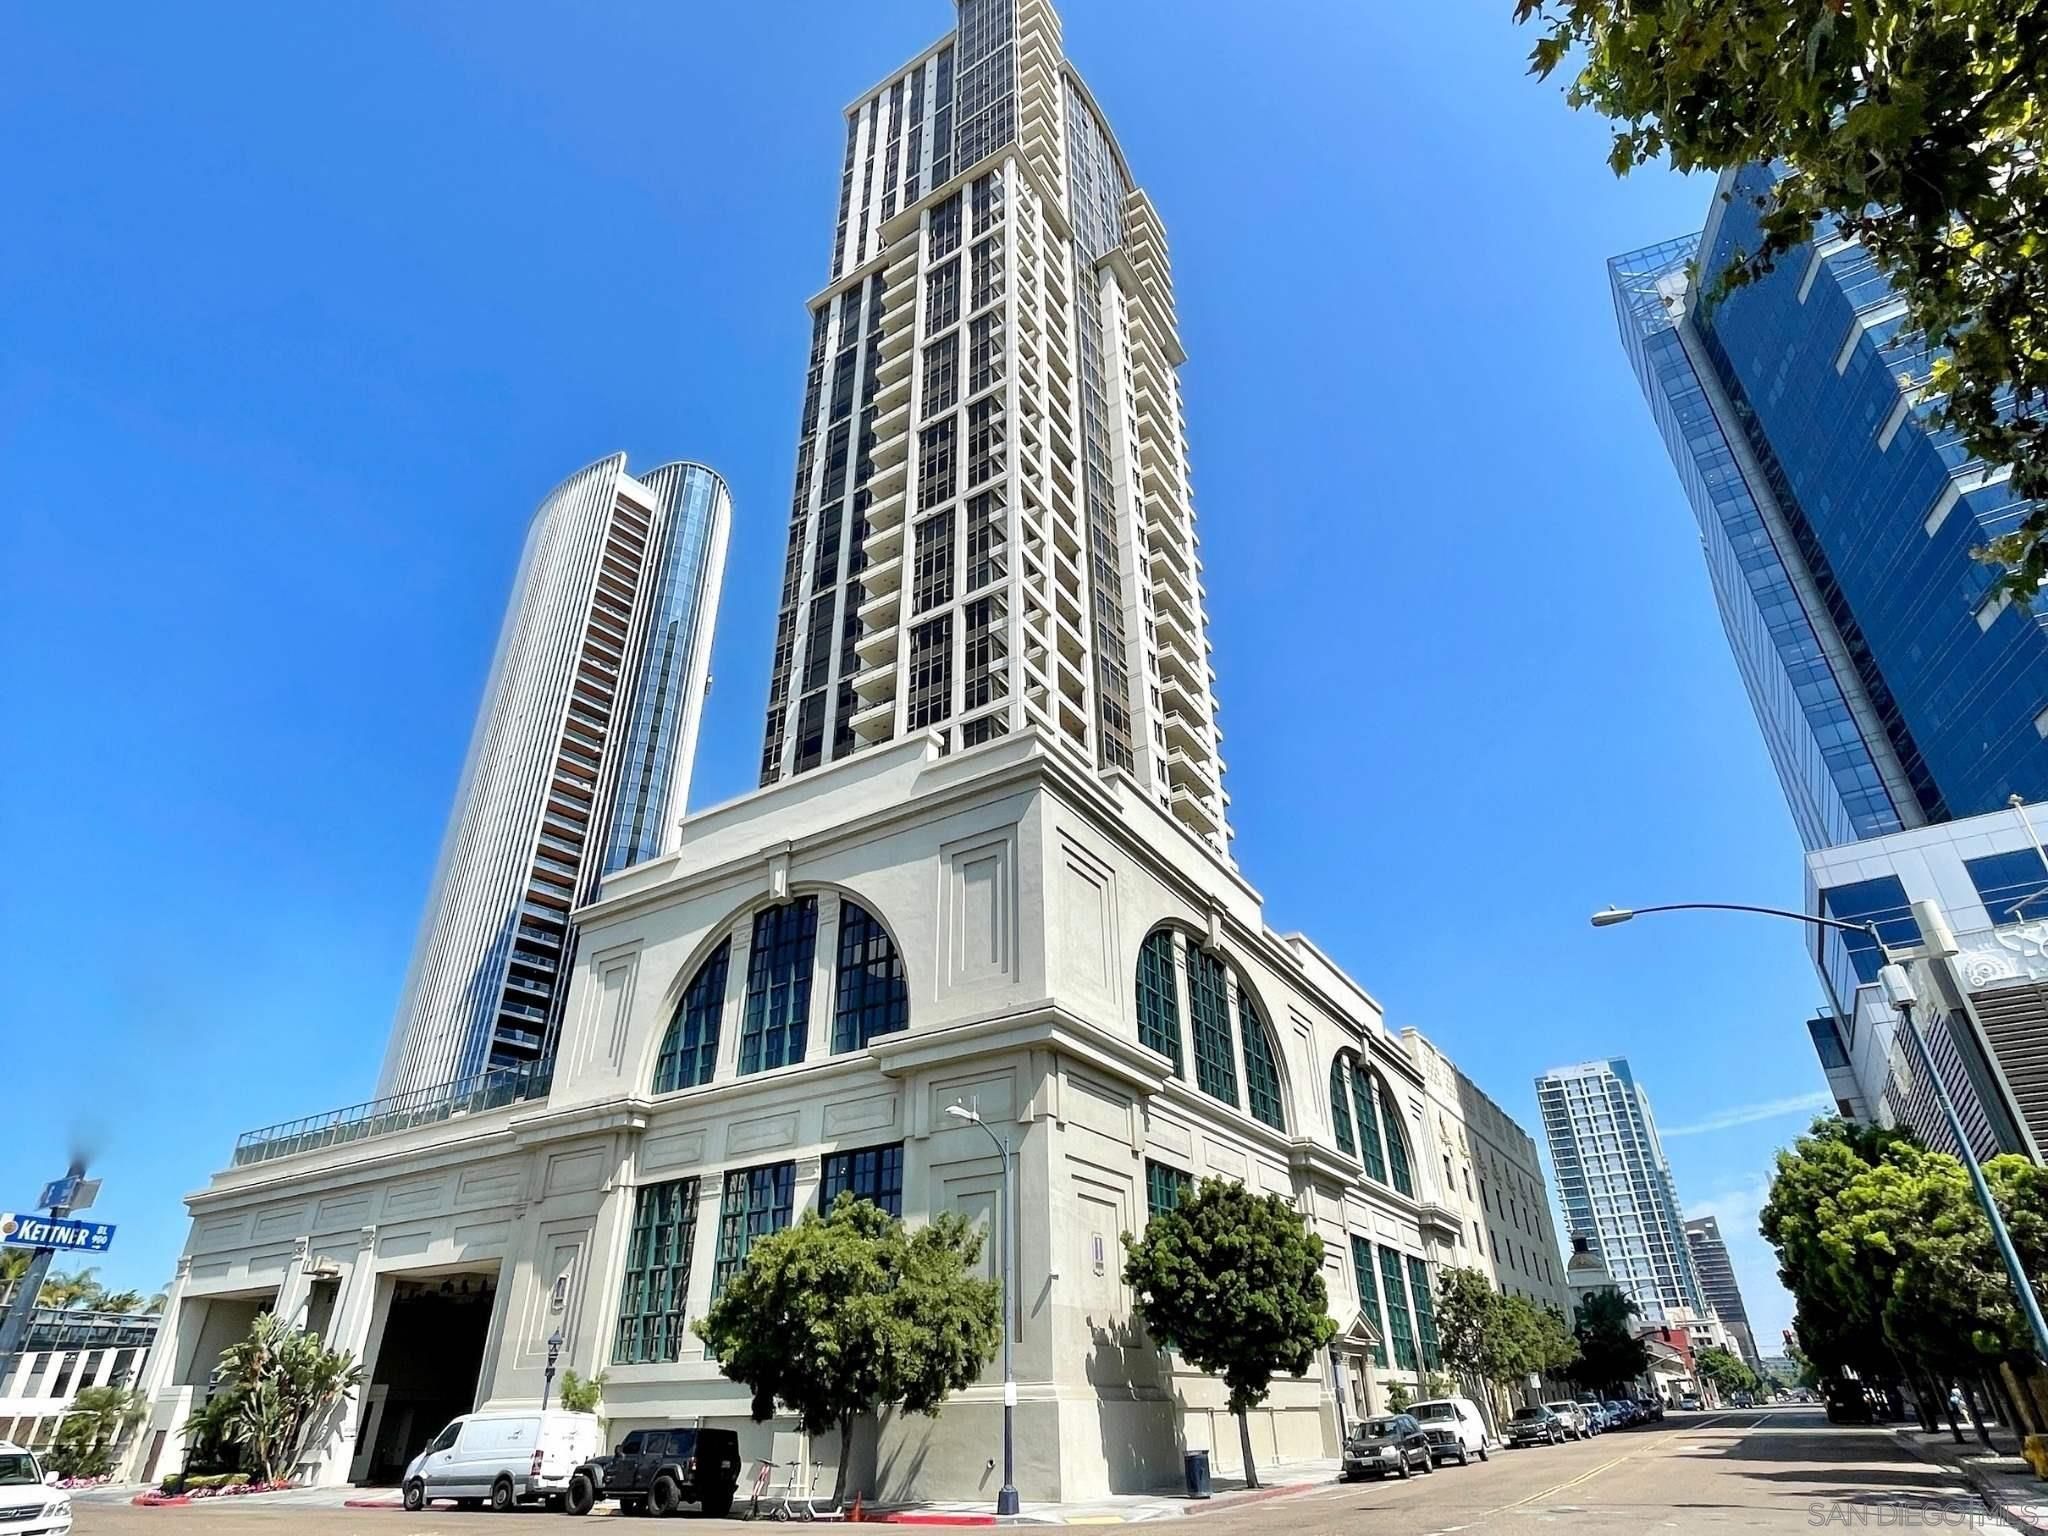 Main Photo: SAN DIEGO Condo for rent : 2 bedrooms : 700 W E St. #514